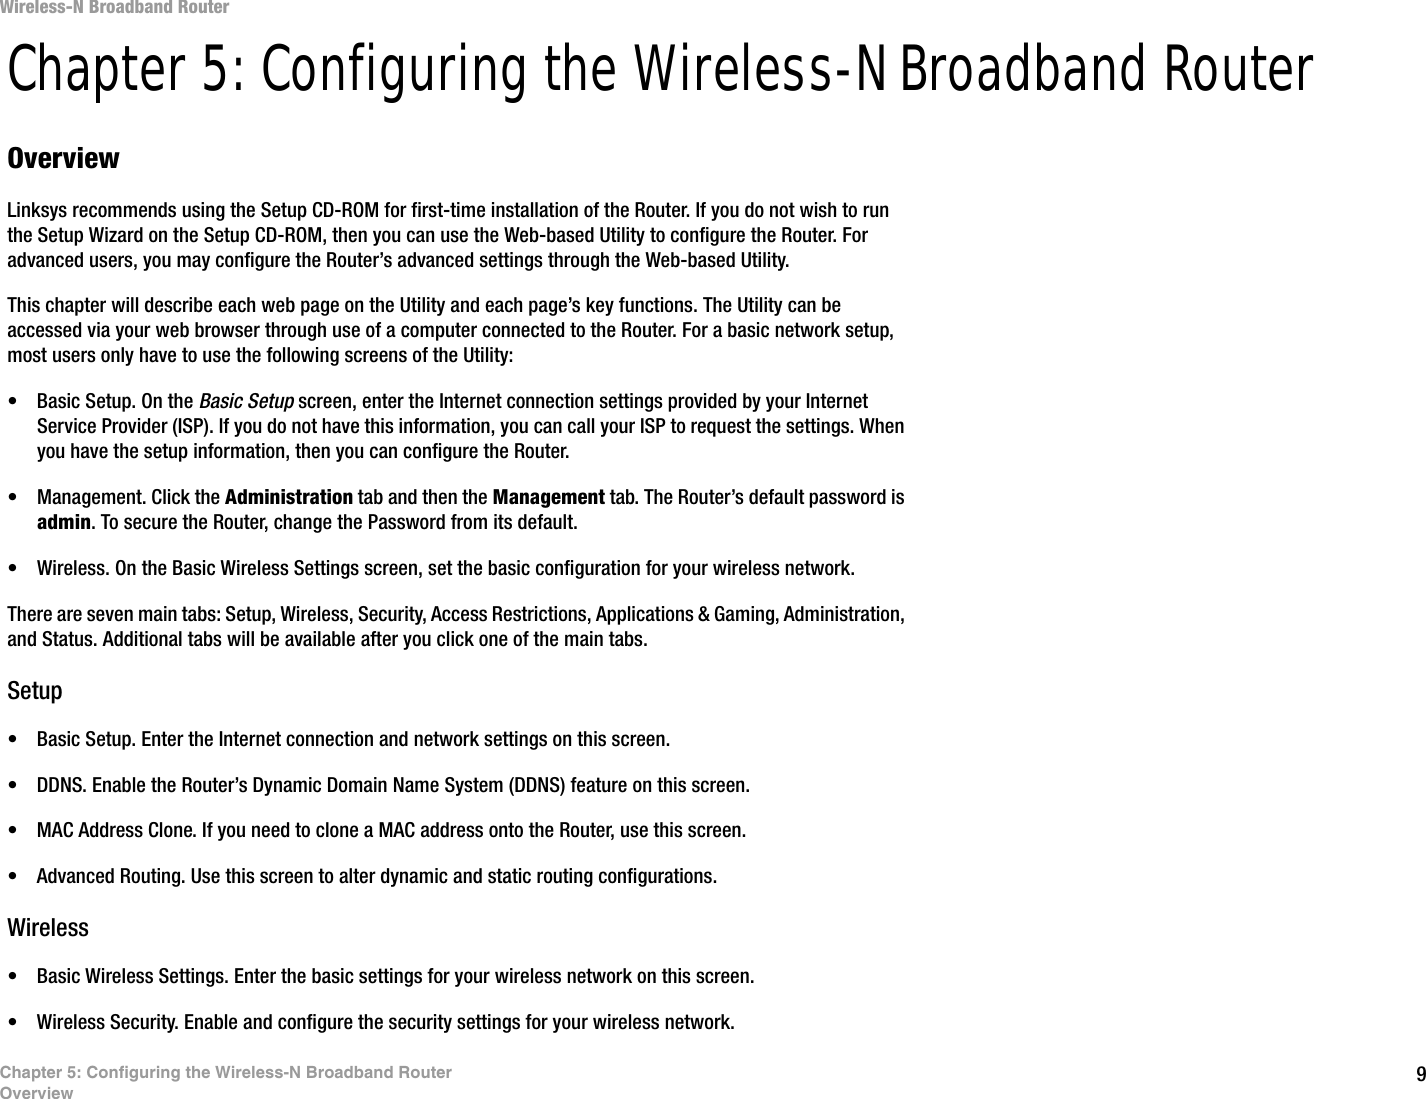 9Chapter 5: Configuring the Wireless-N Broadband RouterOverviewWireless-N Broadband RouterChapter 5: Configuring the Wireless-N Broadband RouterOverviewLinksys recommends using the Setup CD-ROM for first-time installation of the Router. If you do not wish to run the Setup Wizard on the Setup CD-ROM, then you can use the Web-based Utility to configure the Router. For advanced users, you may configure the Router’s advanced settings through the Web-based Utility.This chapter will describe each web page on the Utility and each page’s key functions. The Utility can be accessed via your web browser through use of a computer connected to the Router. For a basic network setup, most users only have to use the following screens of the Utility:• Basic Setup. On the Basic Setup screen, enter the Internet connection settings provided by your Internet Service Provider (ISP). If you do not have this information, you can call your ISP to request the settings. When you have the setup information, then you can configure the Router.• Management. Click the Administration tab and then the Management tab. The Router’s default password is admin. To secure the Router, change the Password from its default.• Wireless. On the Basic Wireless Settings screen, set the basic configuration for your wireless network.There are seven main tabs: Setup, Wireless, Security, Access Restrictions, Applications &amp; Gaming, Administration, and Status. Additional tabs will be available after you click one of the main tabs.Setup• Basic Setup. Enter the Internet connection and network settings on this screen.• DDNS. Enable the Router’s Dynamic Domain Name System (DDNS) feature on this screen.• MAC Address Clone. If you need to clone a MAC address onto the Router, use this screen.• Advanced Routing. Use this screen to alter dynamic and static routing configurations.Wireless• Basic Wireless Settings. Enter the basic settings for your wireless network on this screen.• Wireless Security. Enable and configure the security settings for your wireless network.